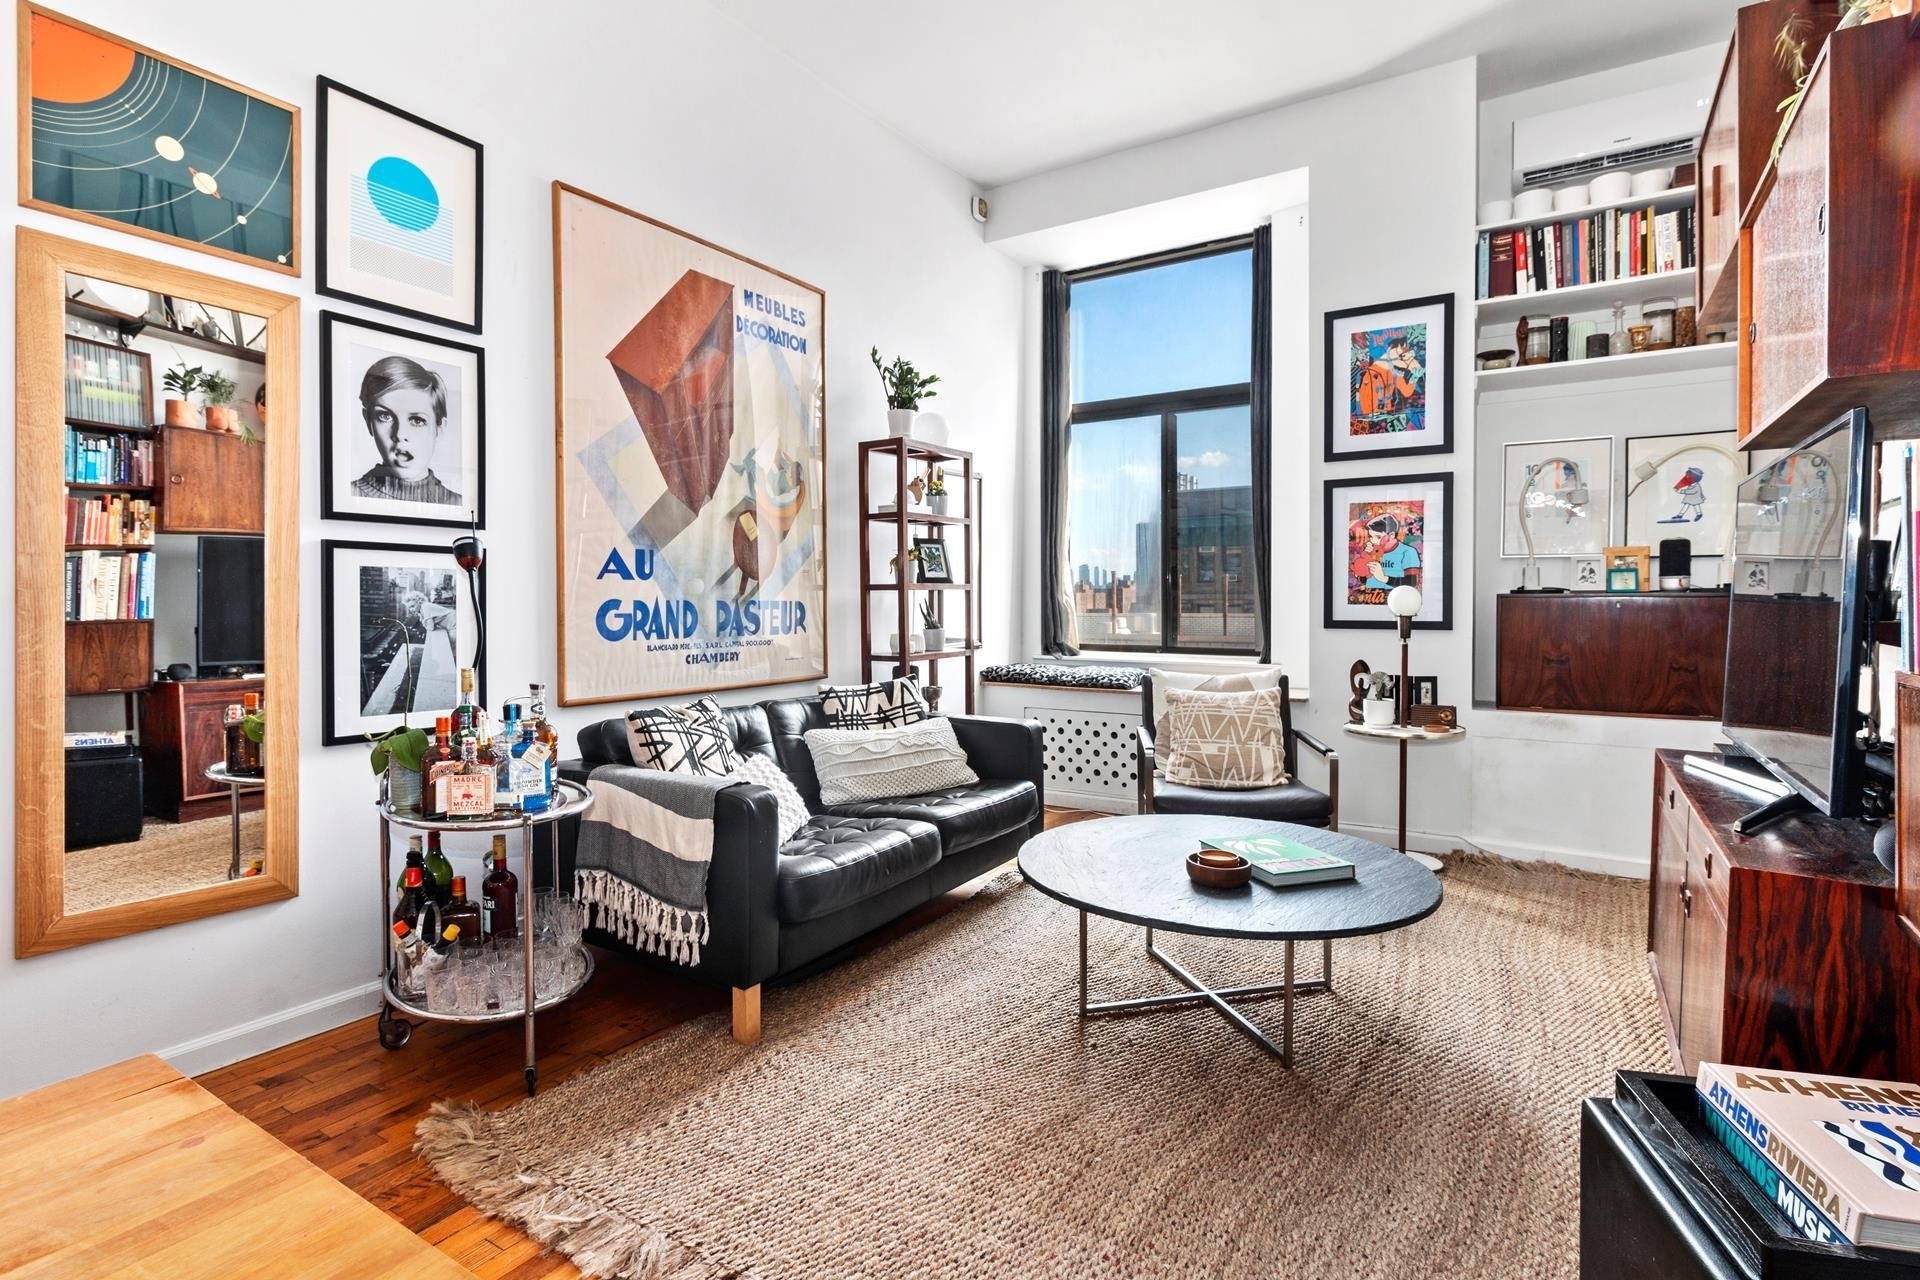 Co-op / Condo at Foundry, The, 310 E 23RD ST, 10C New York